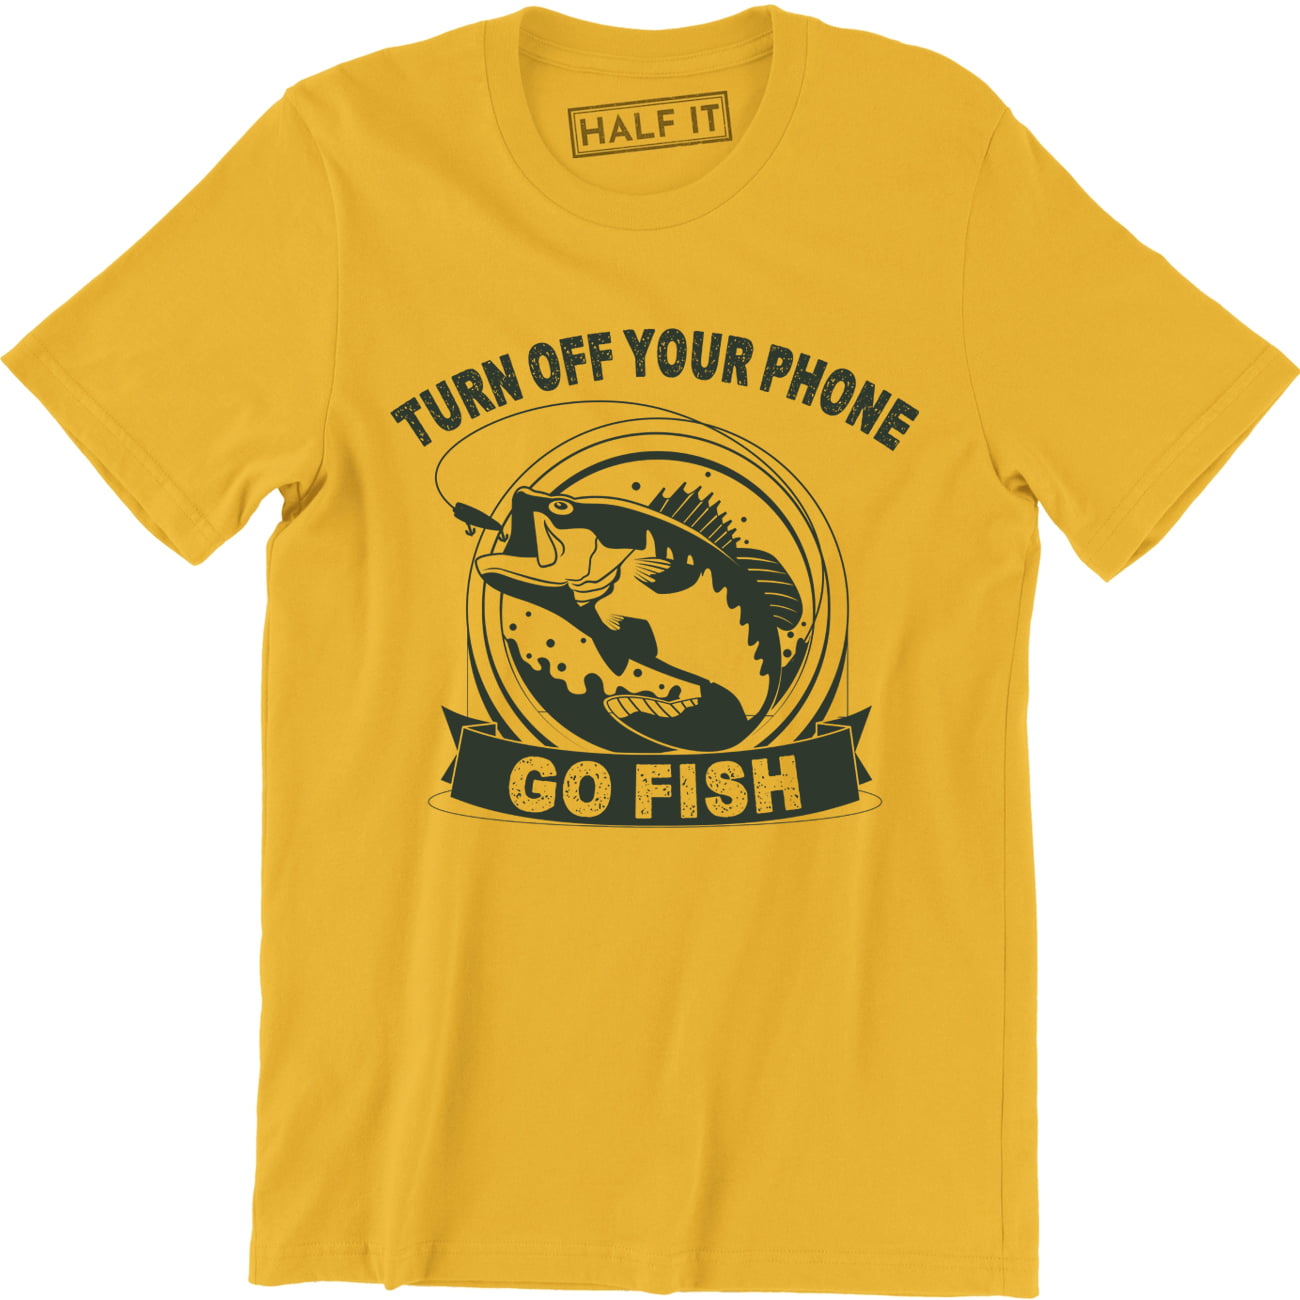 Turn Off Your Phone Go Fish Funny Work Meme Men's T-Shirt, 48% OFF